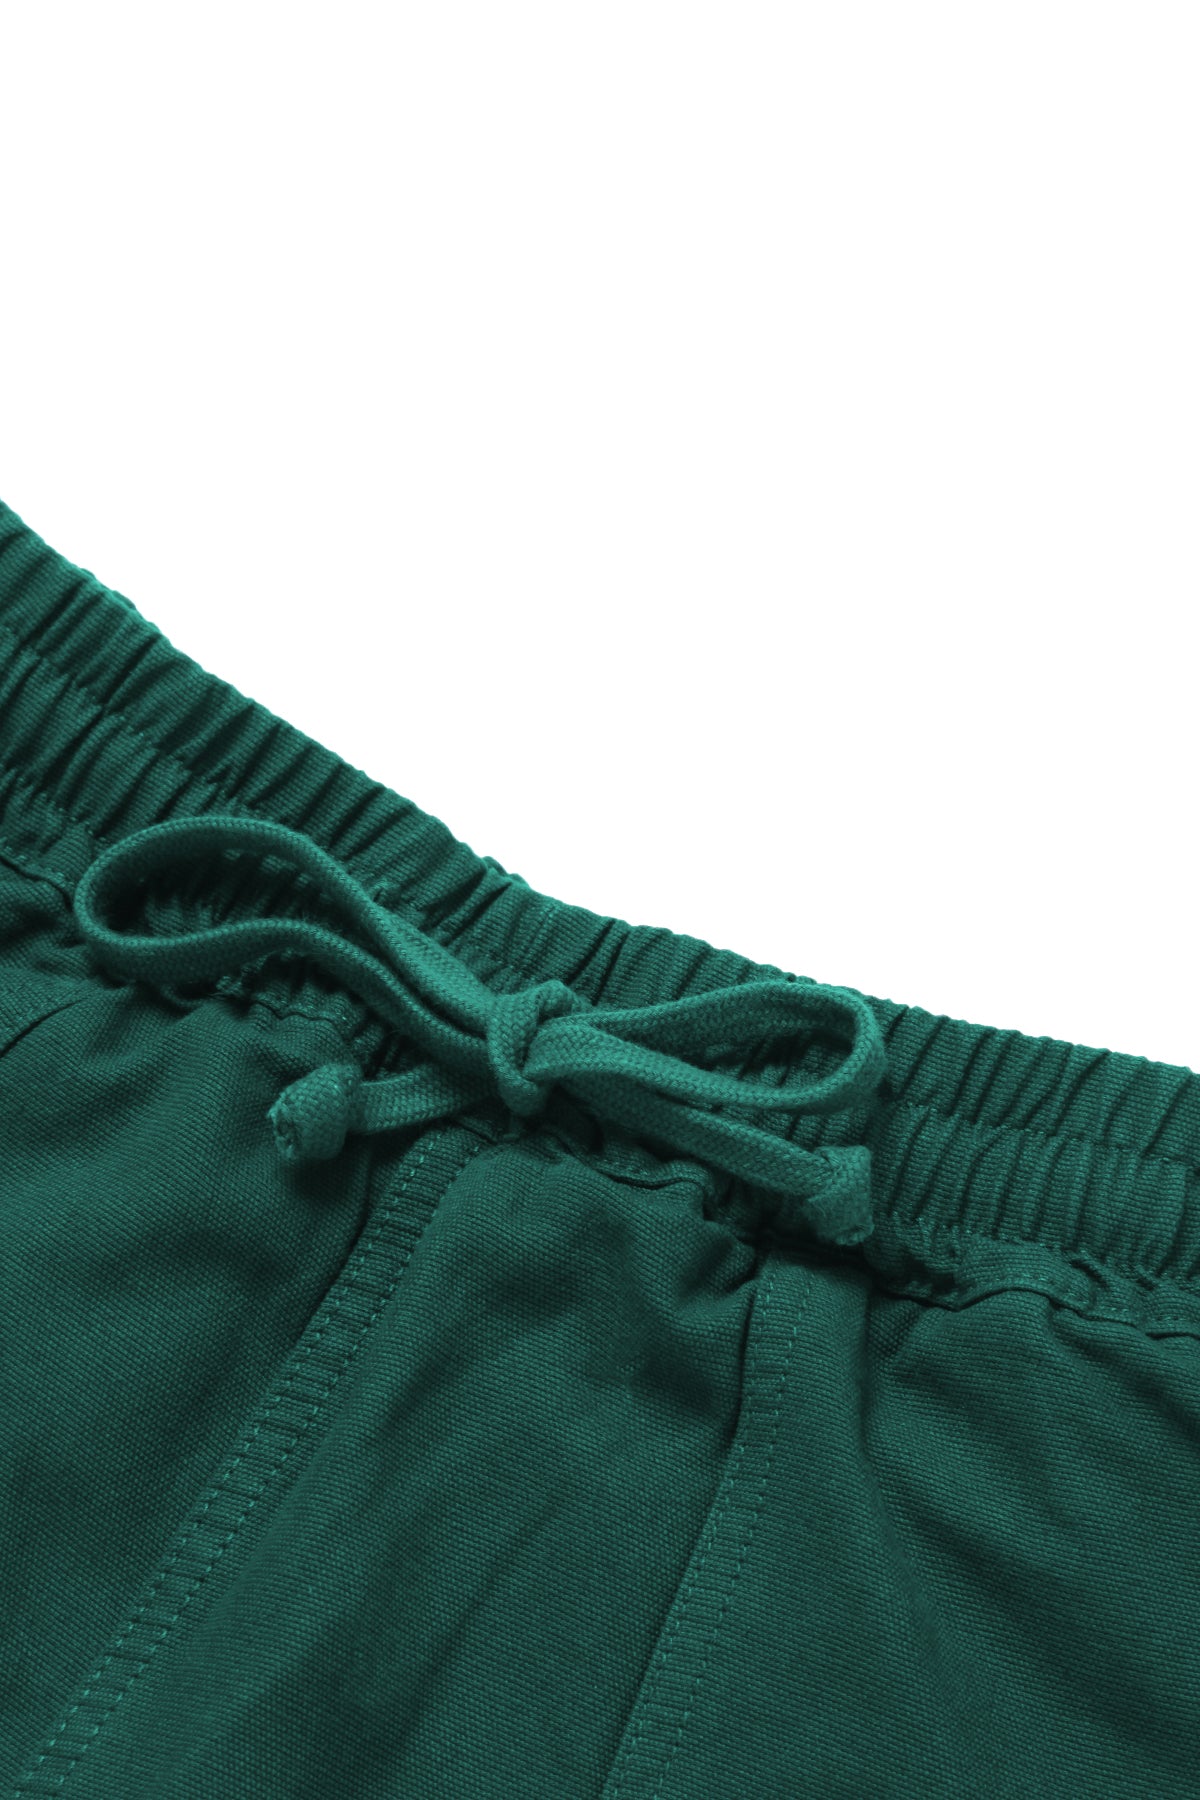 Service Works - Classic Chef Shorts - Teal